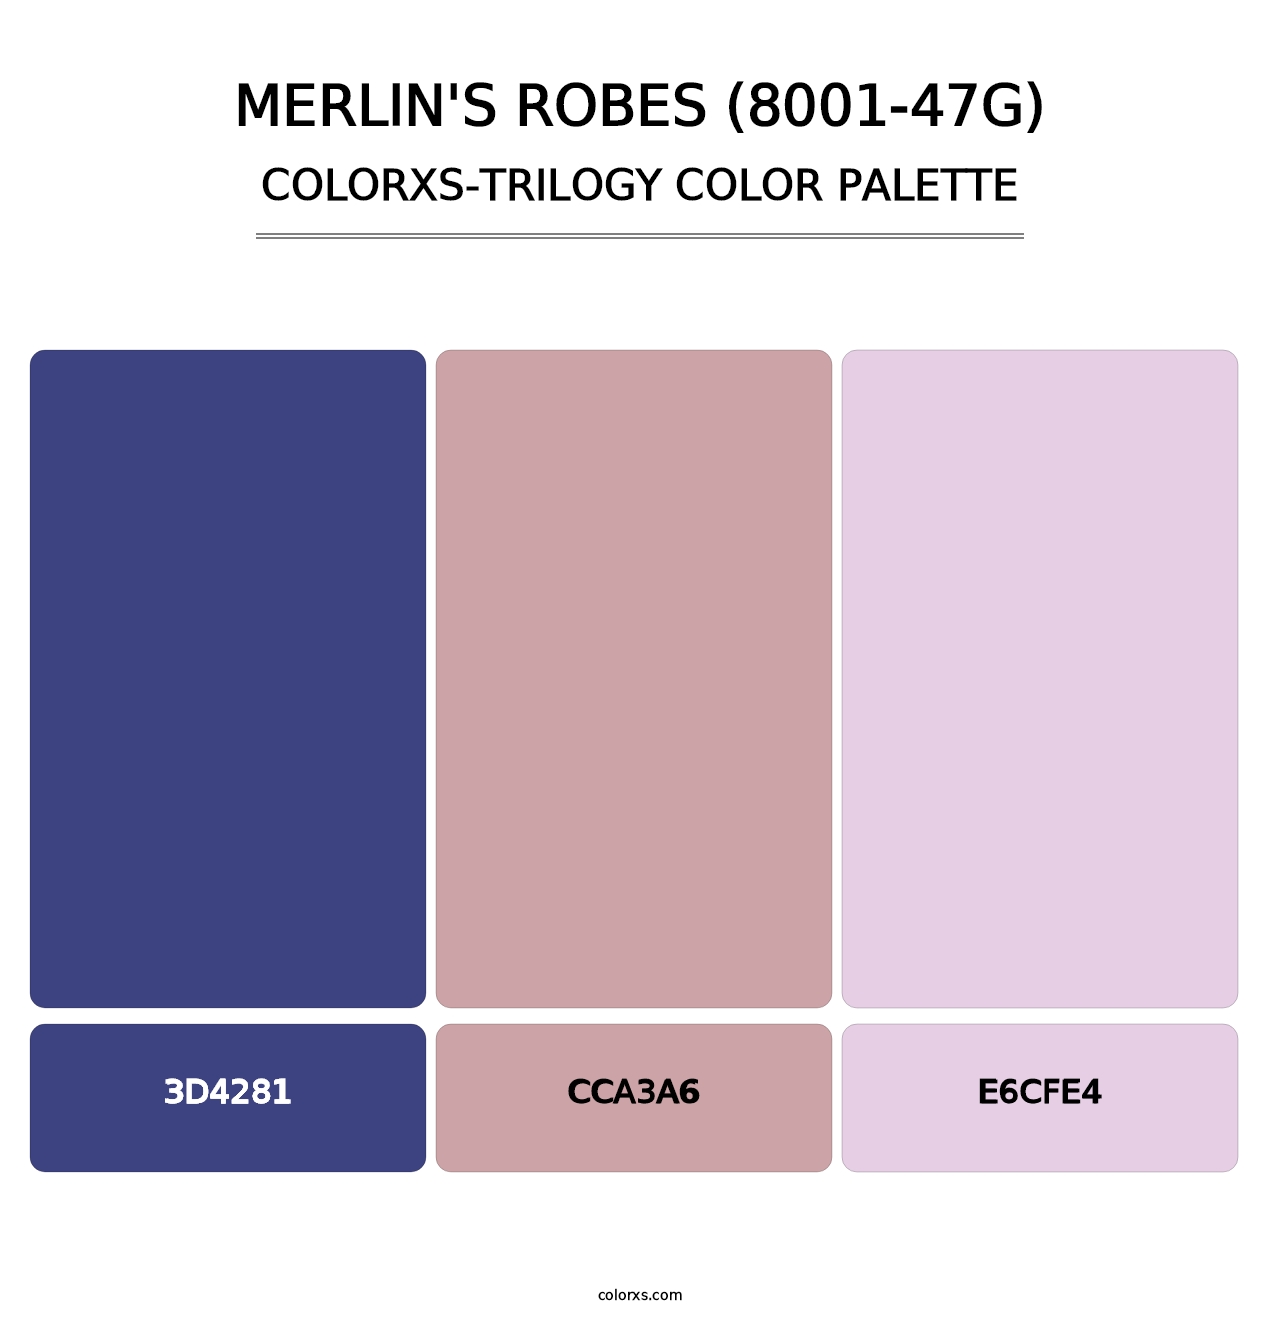 Merlin's Robes (8001-47G) - Colorxs Trilogy Palette